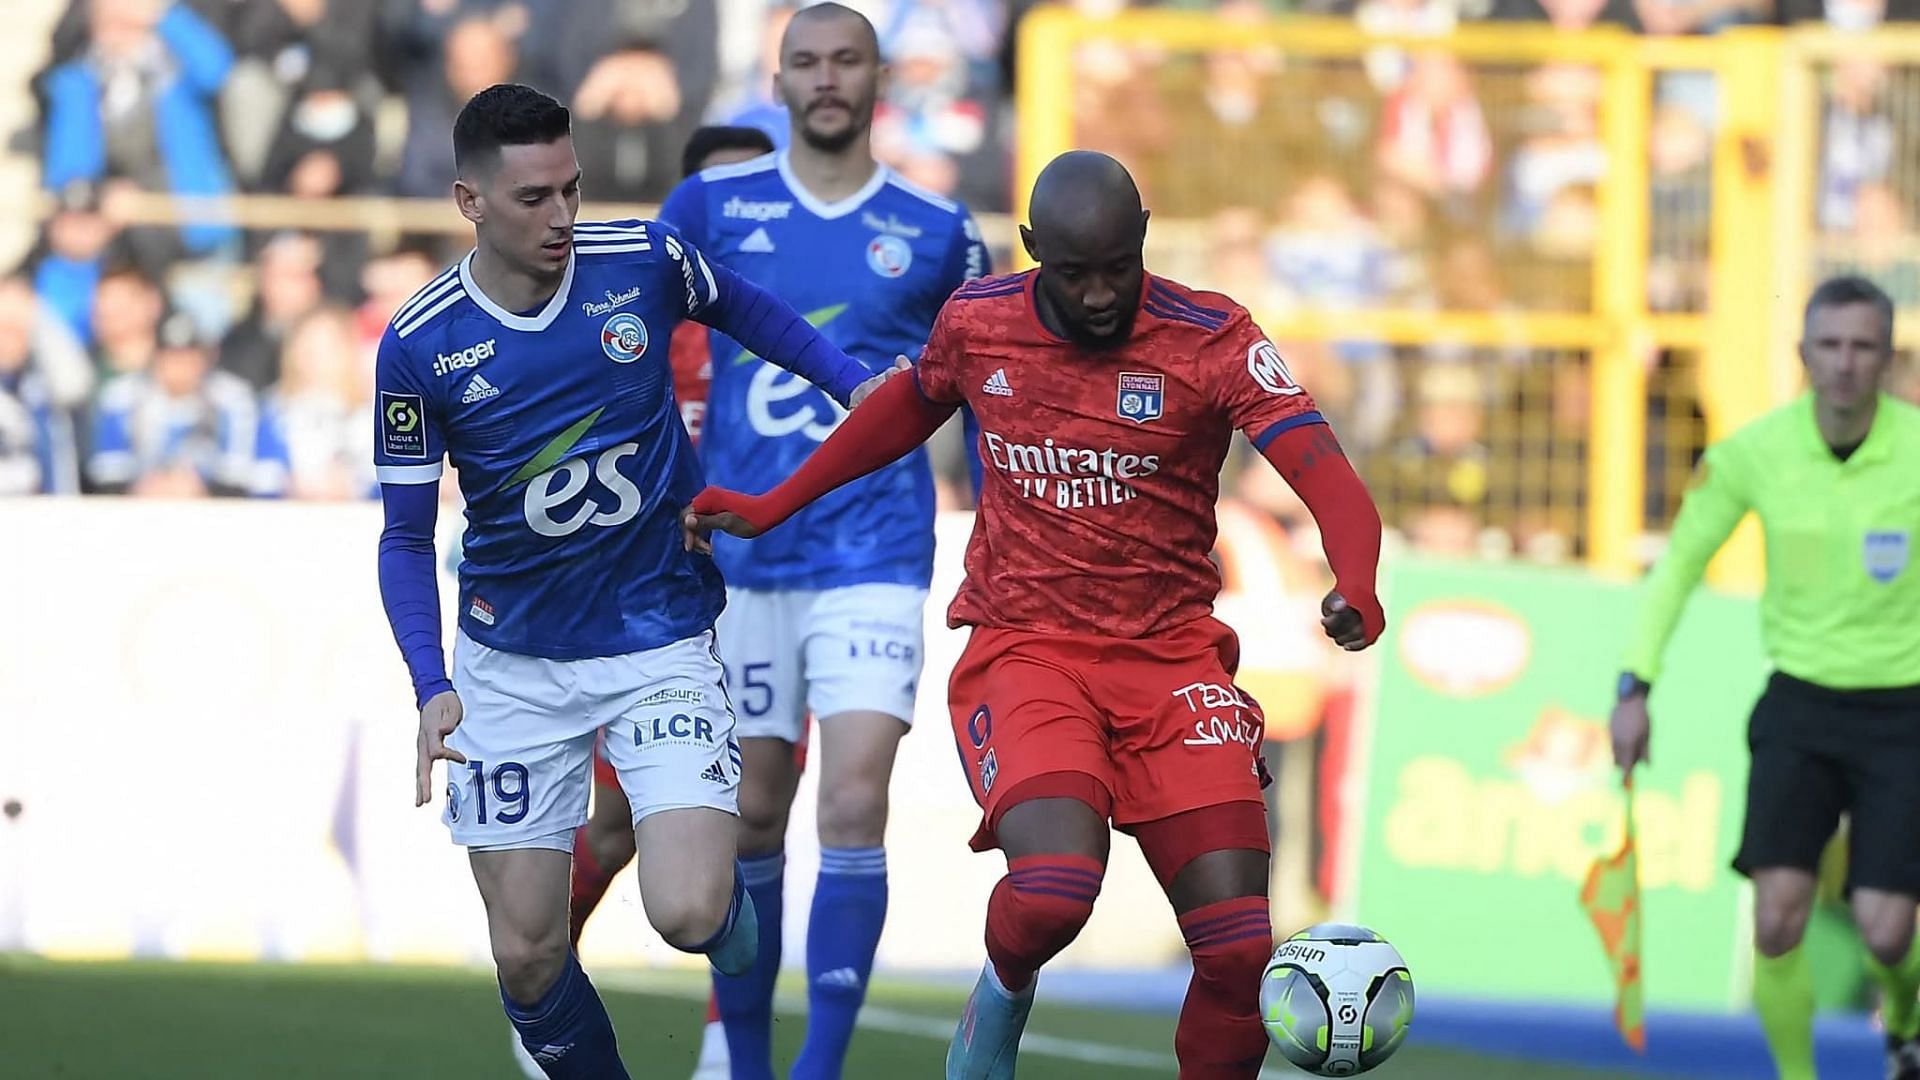 Strasbourg and Lyon will meet in Ligue 1 on Friday